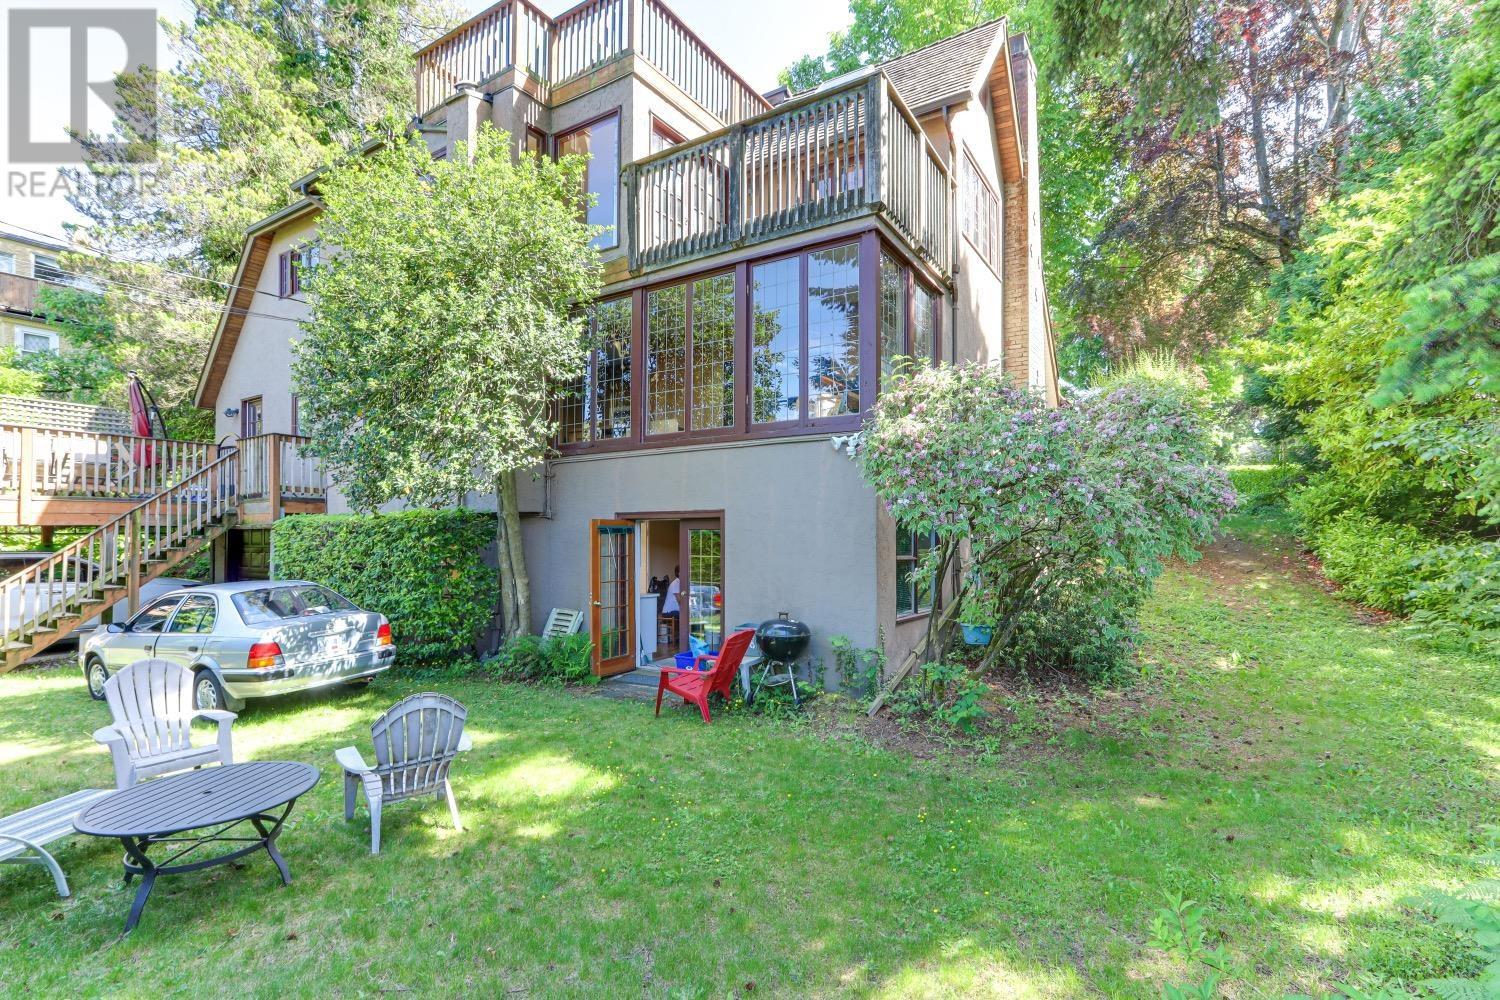 Listing Picture 33 of 40 : 4095 CROWN CRESCENT, Vancouver / 溫哥華 - 魯藝地產 Yvonne Lu Group - MLS Medallion Club Member